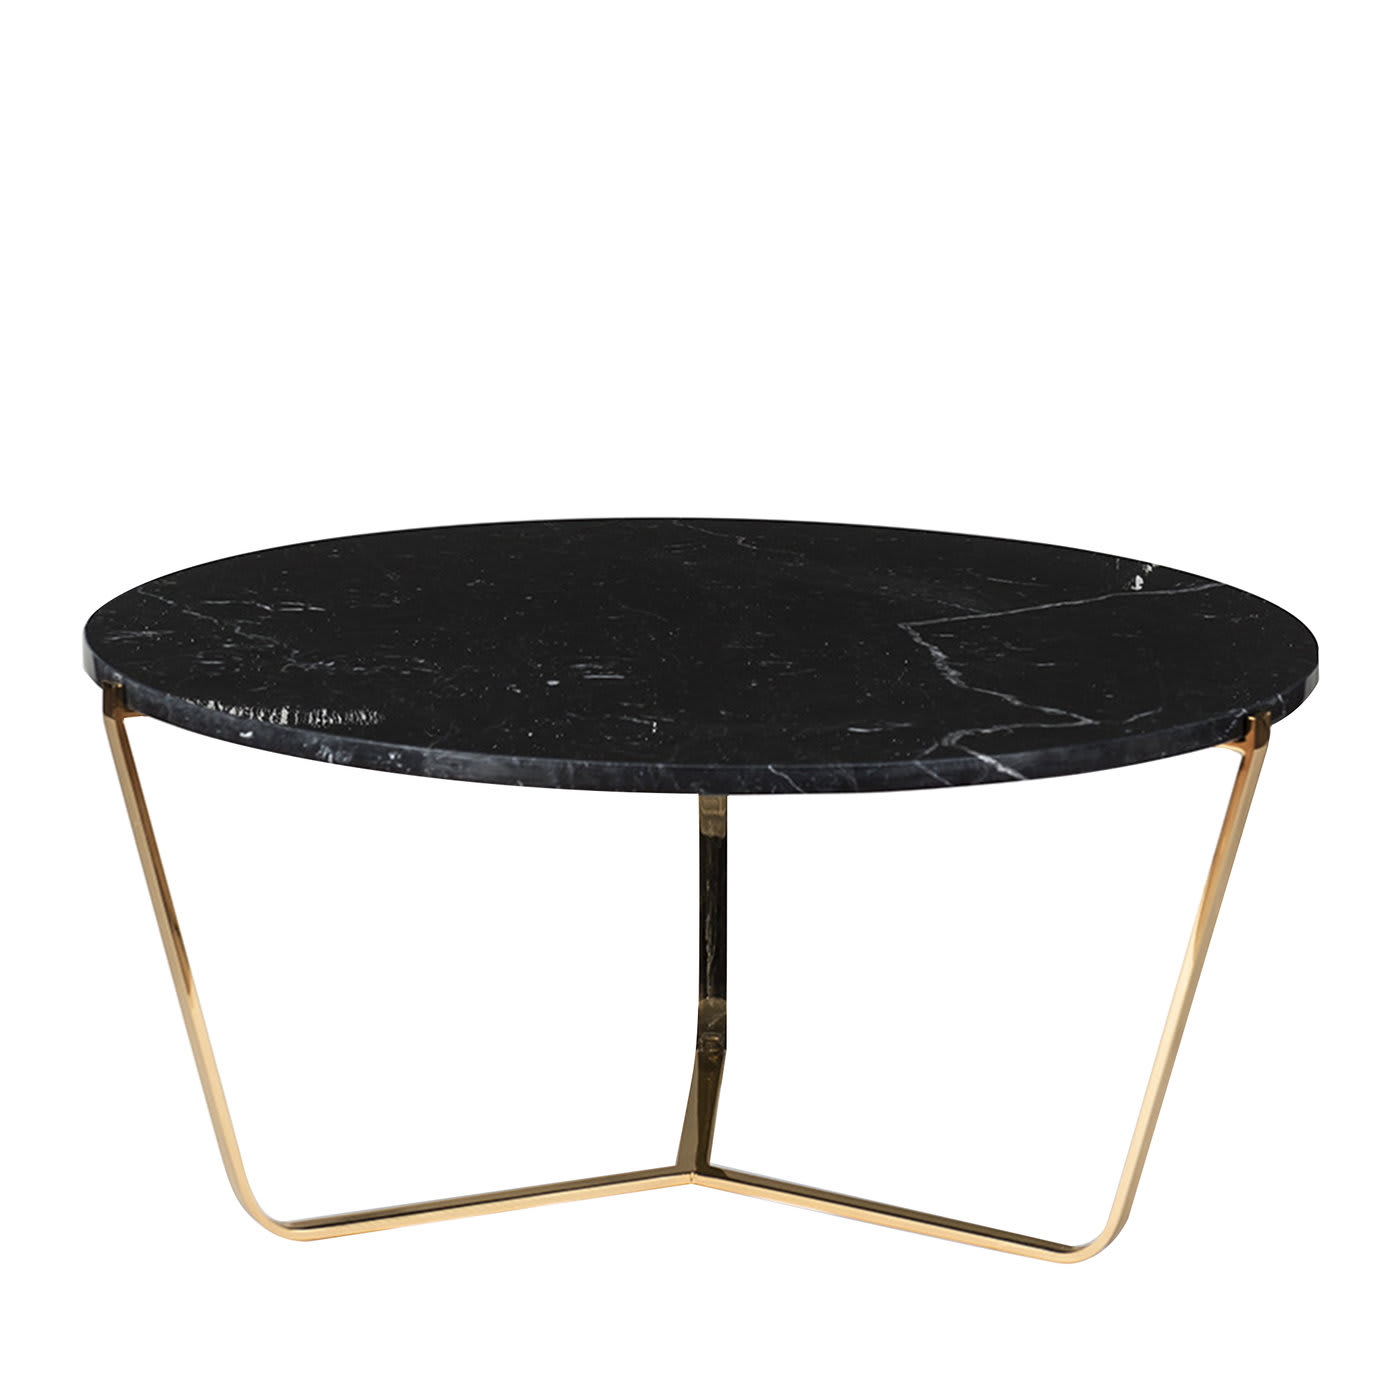 Dolomiti Black Marquina Marble Tall Coffee Table - VGnewtrend